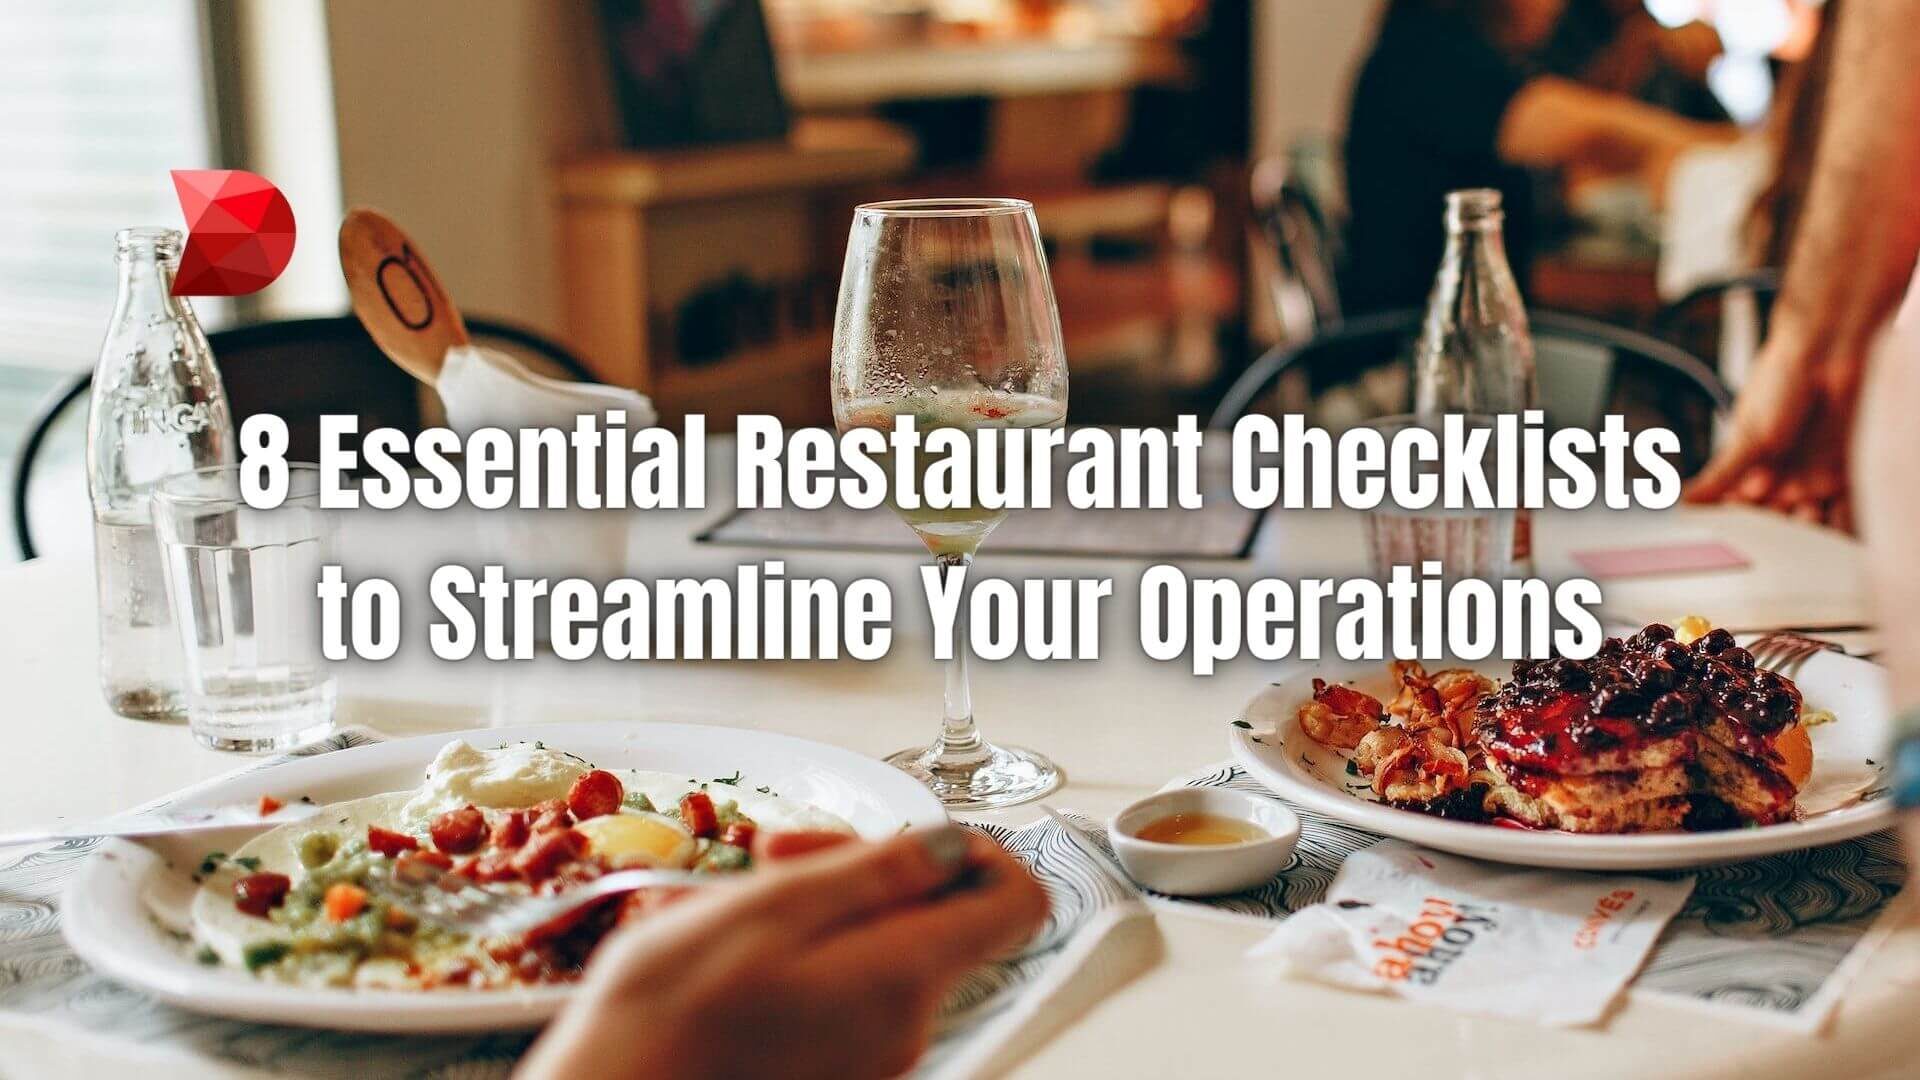 Enhance your restaurant's efficiency with this guide! Click here to discover 8 essential restaurant checklists to streamline your operations.